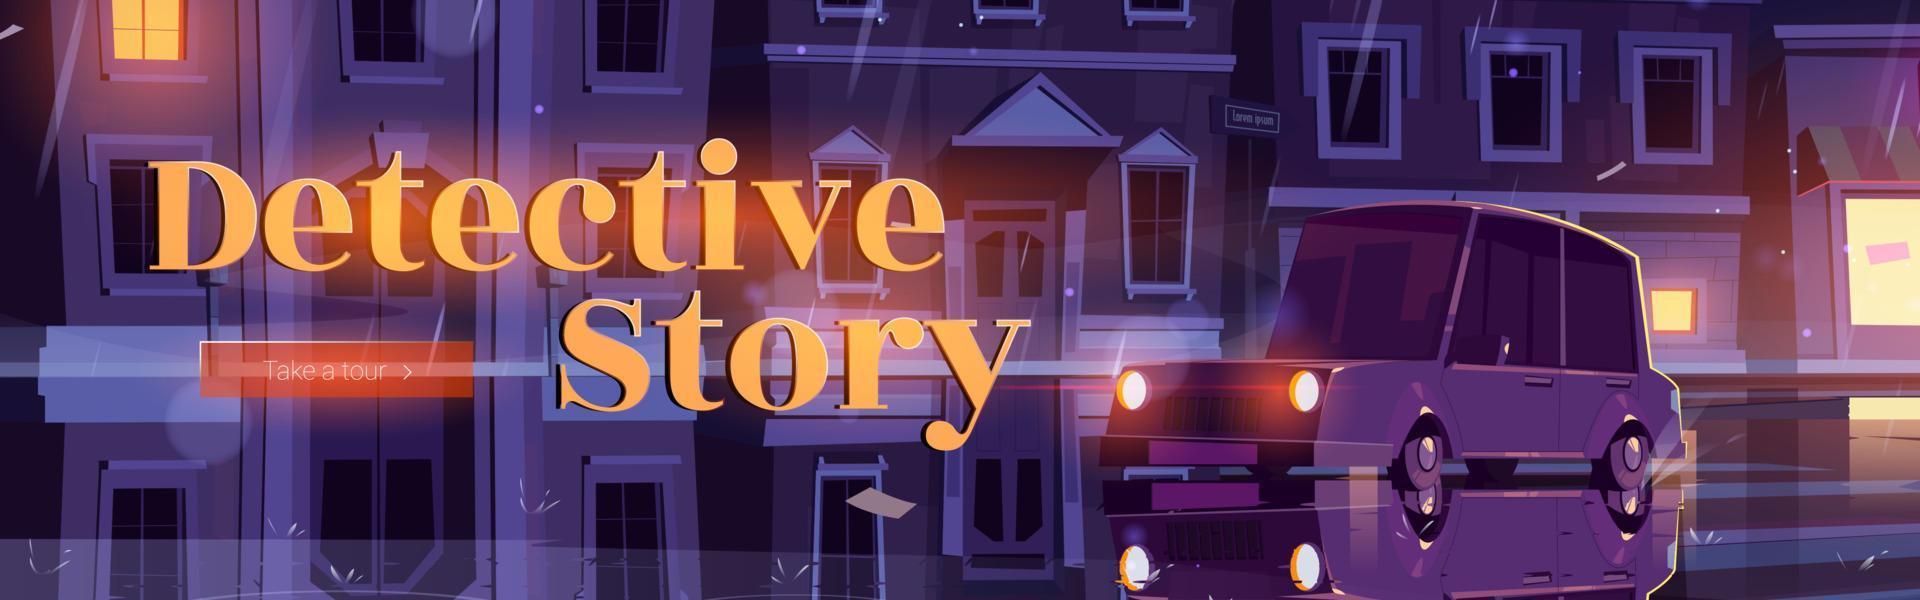 Detective story tour banner with night city street vector